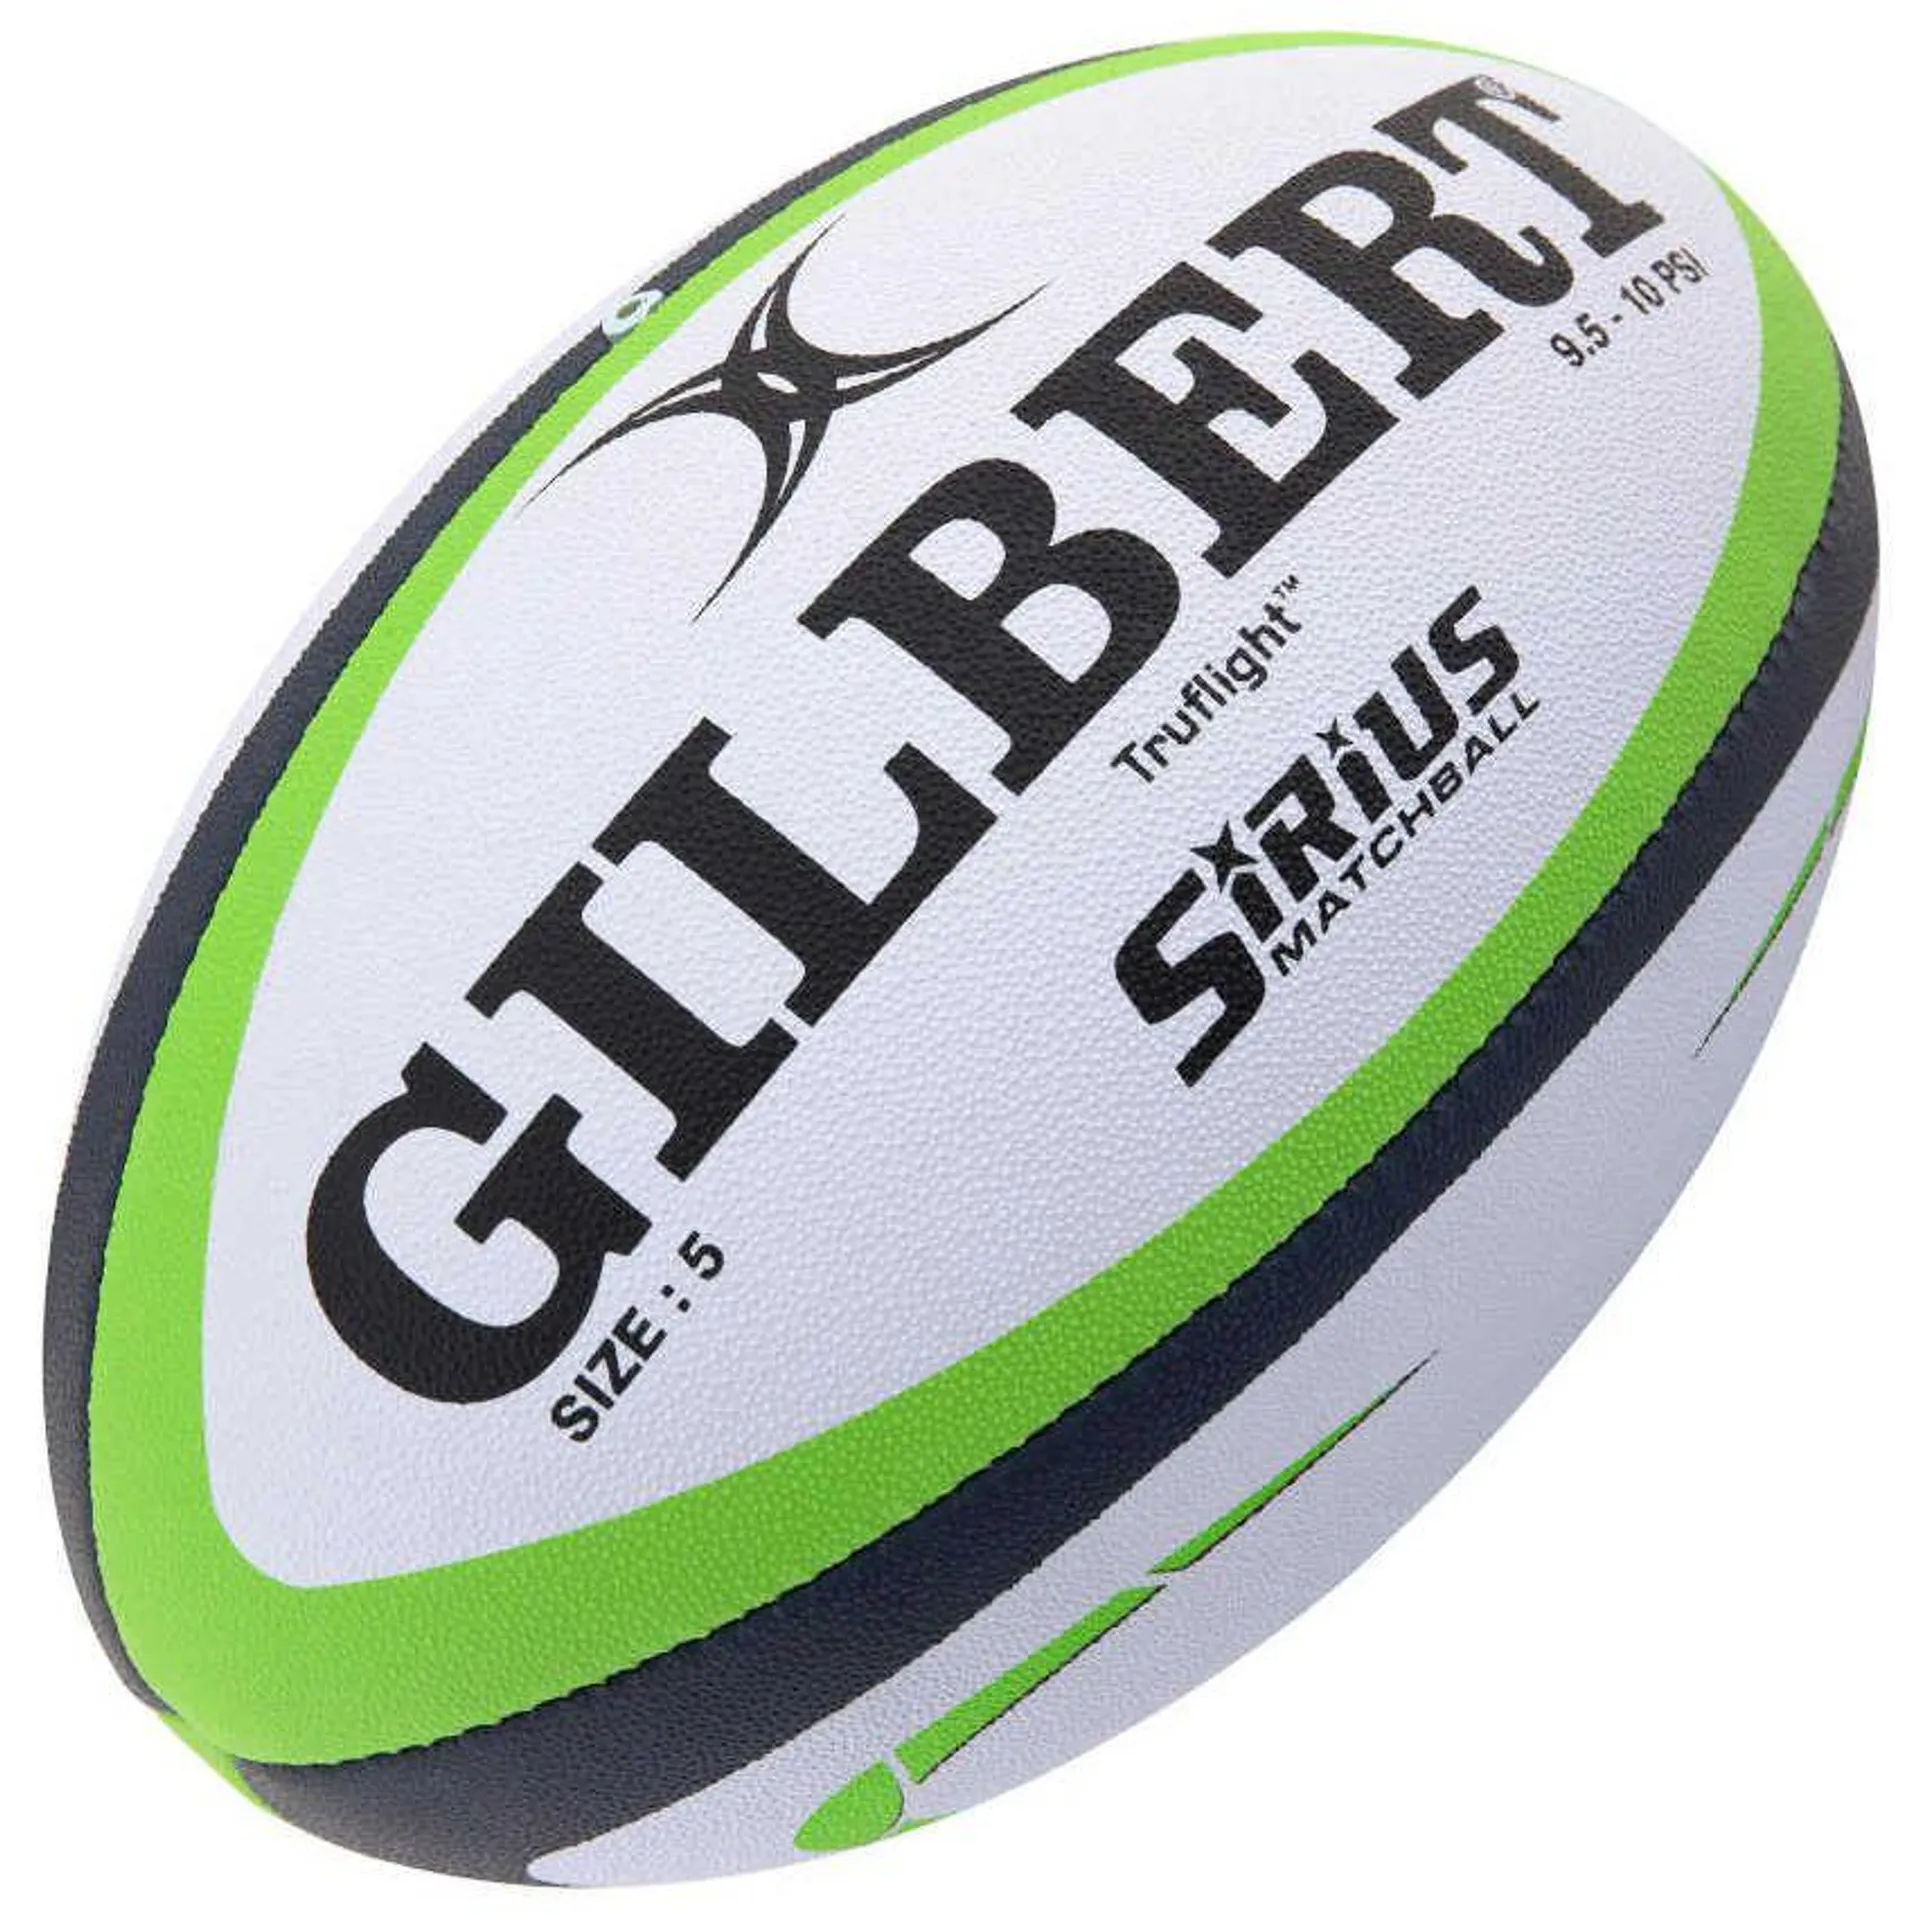 Ballon Rugby Sirius Taille 5 - GILBERT